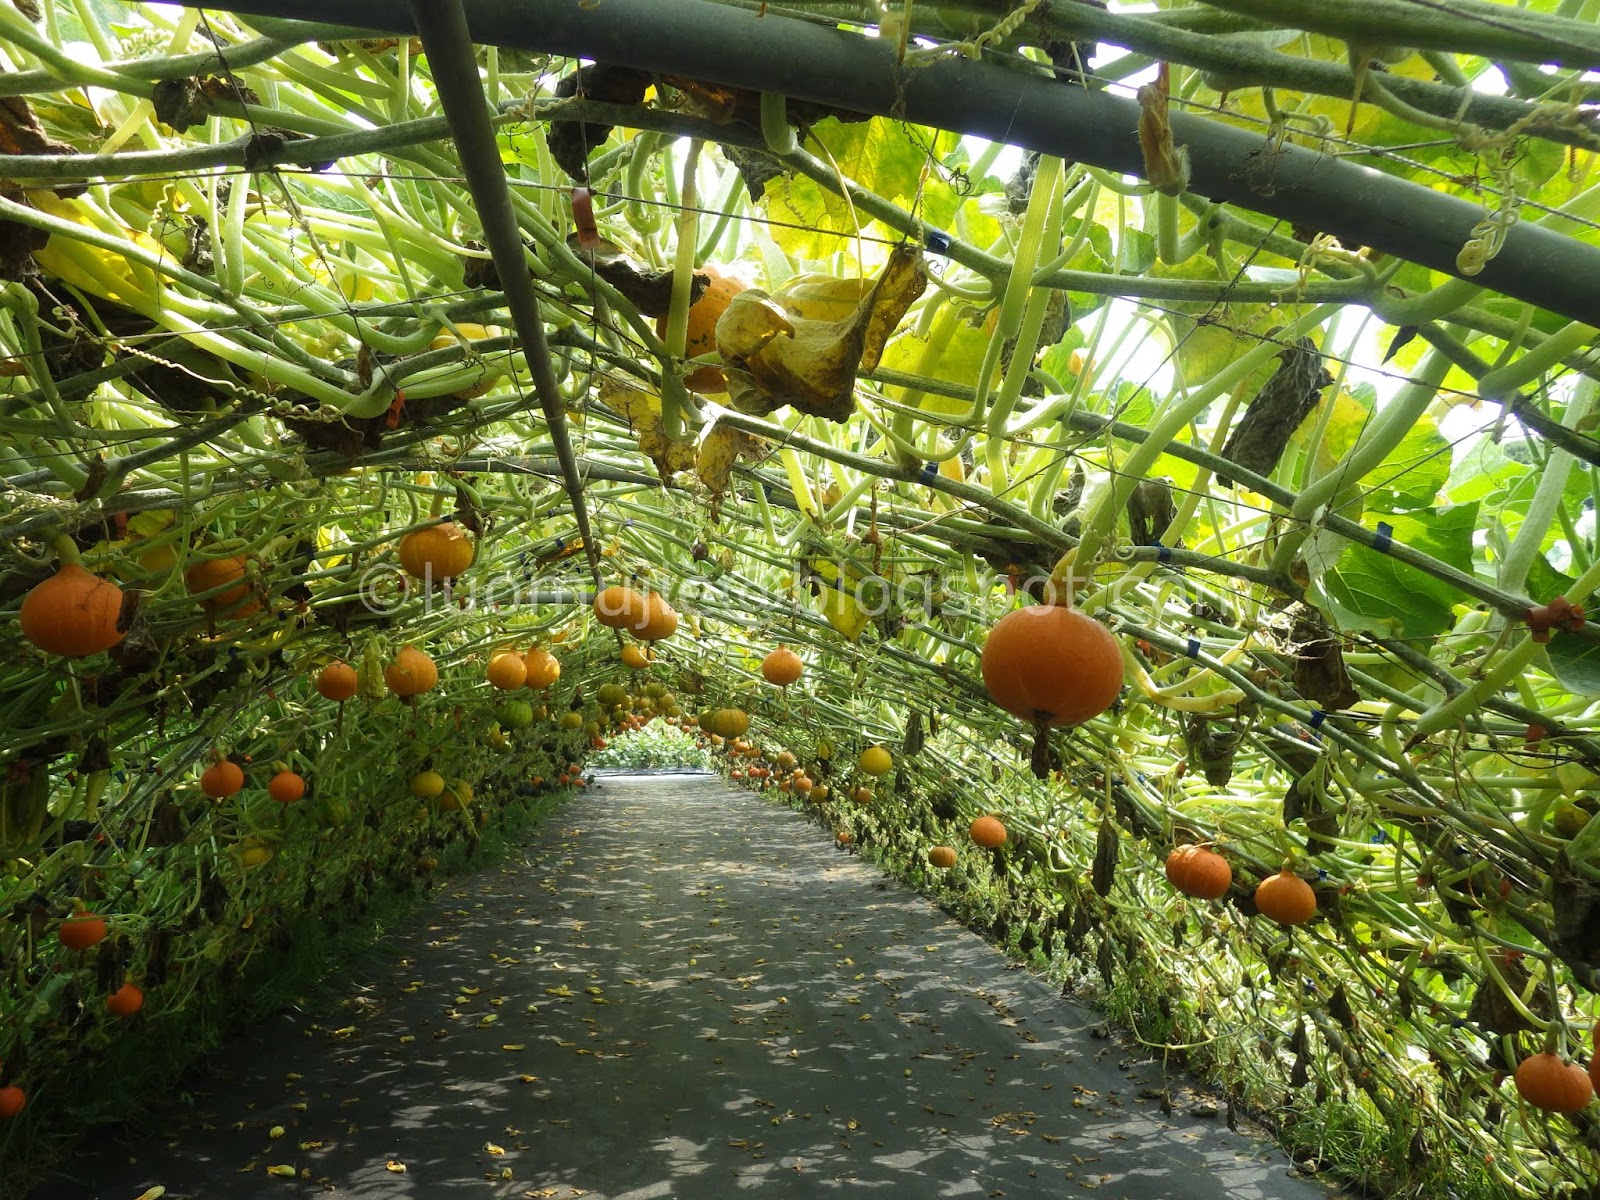 Tamsui Pumpkin Tunnel (淡水南瓜隧道) [Travel in Taiwan 180519: Pump Up the ...